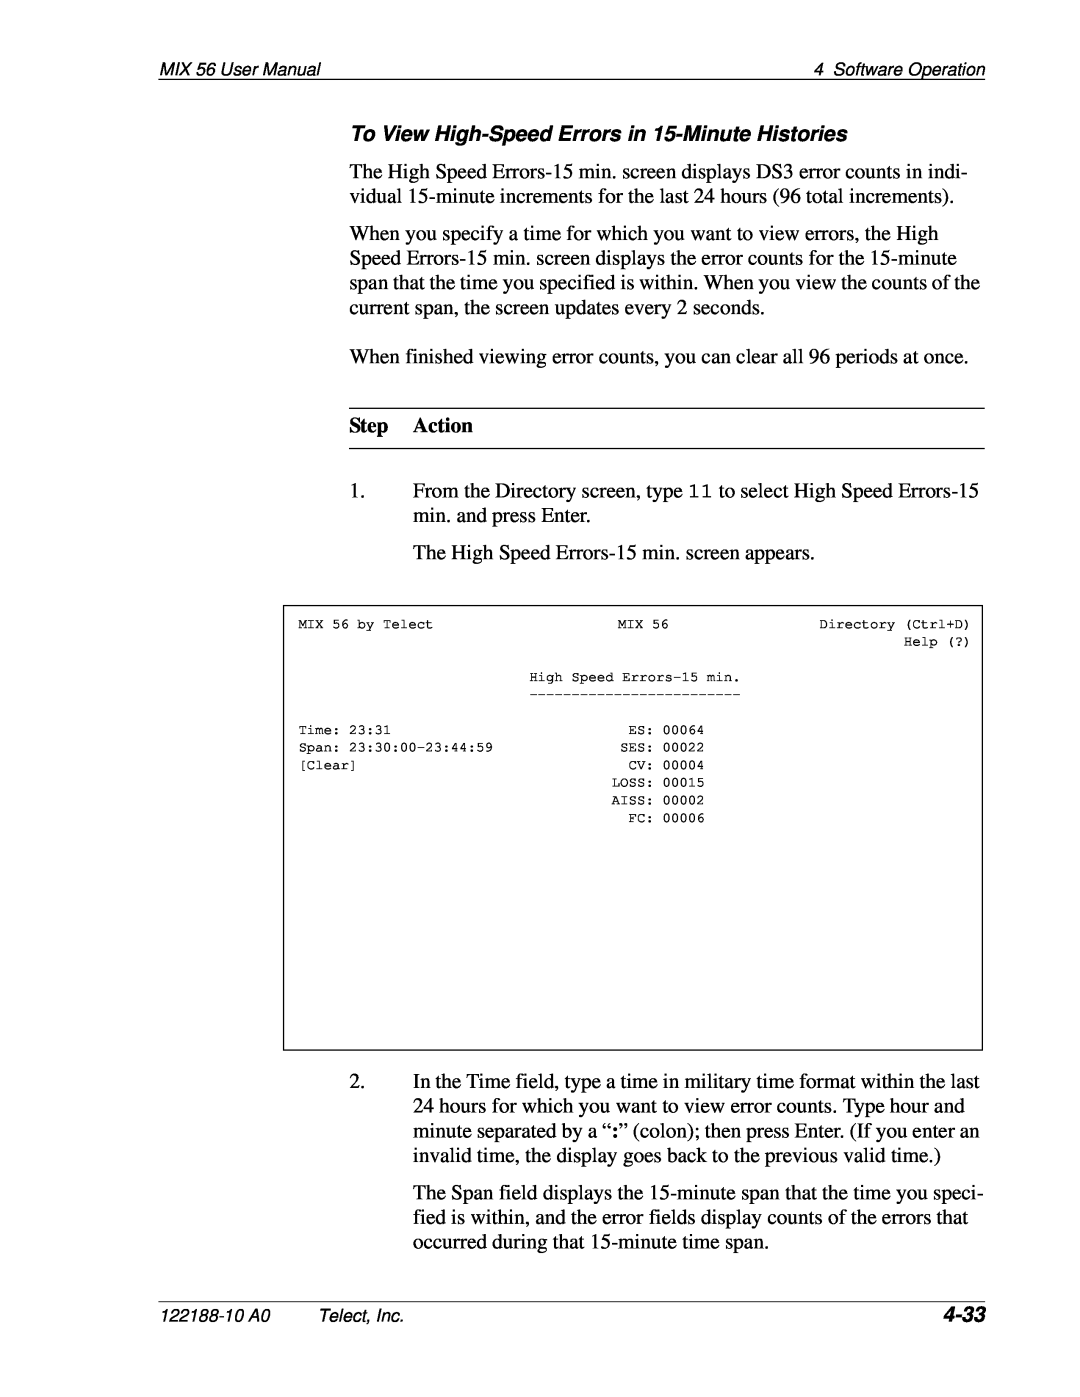 Telect MIX 56 user manual To View High-Speed Errors in 15-Minute Histories, 4-33, Step Action 